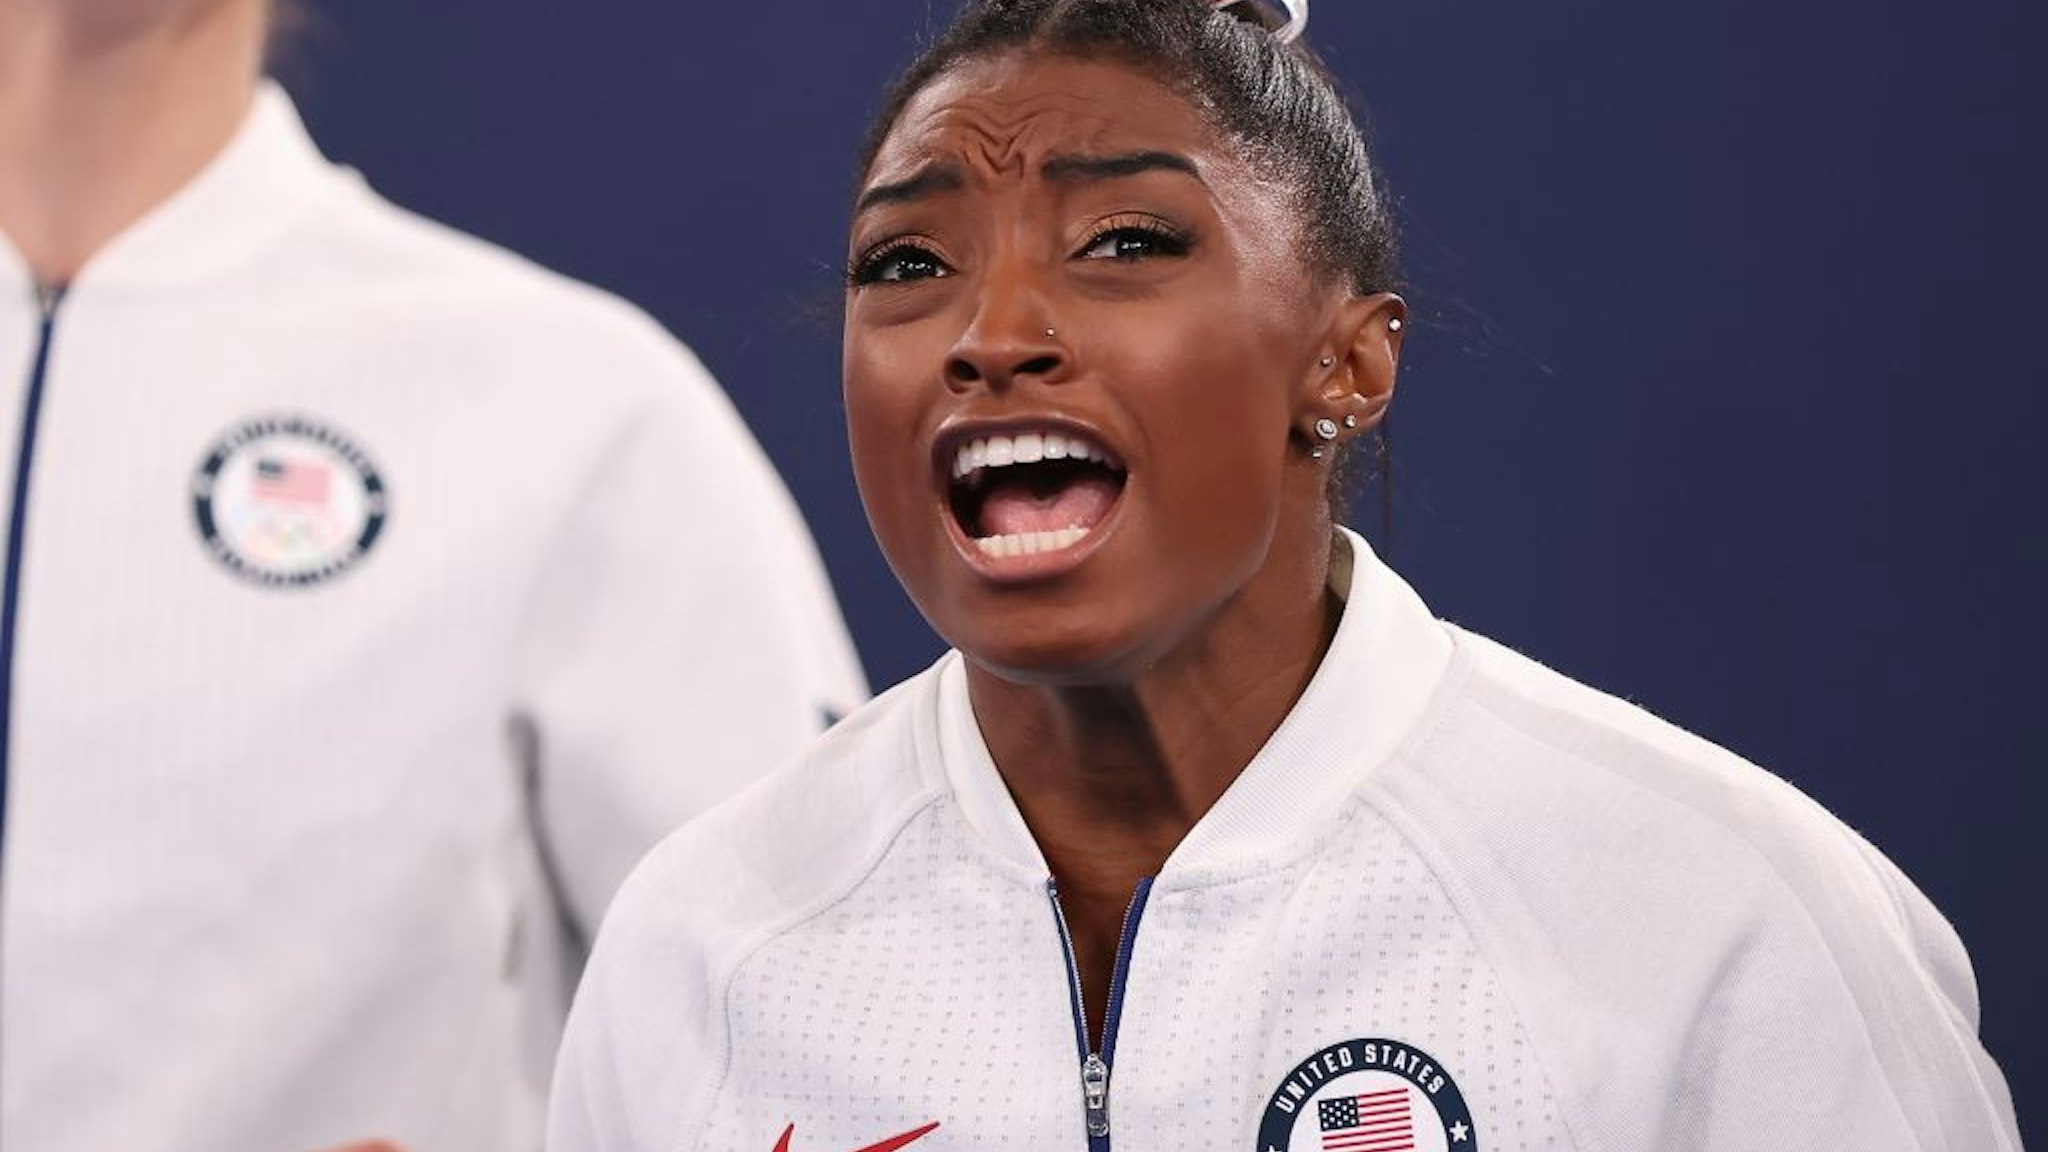 Simone Biles of the United States is seen during the artistic gymnastics women's team final at the Tokyo 2020 Olympic Games in Tokyo, Japan, July 27, 2021. (Photo by Cao Can/Xinhua via Getty Images)